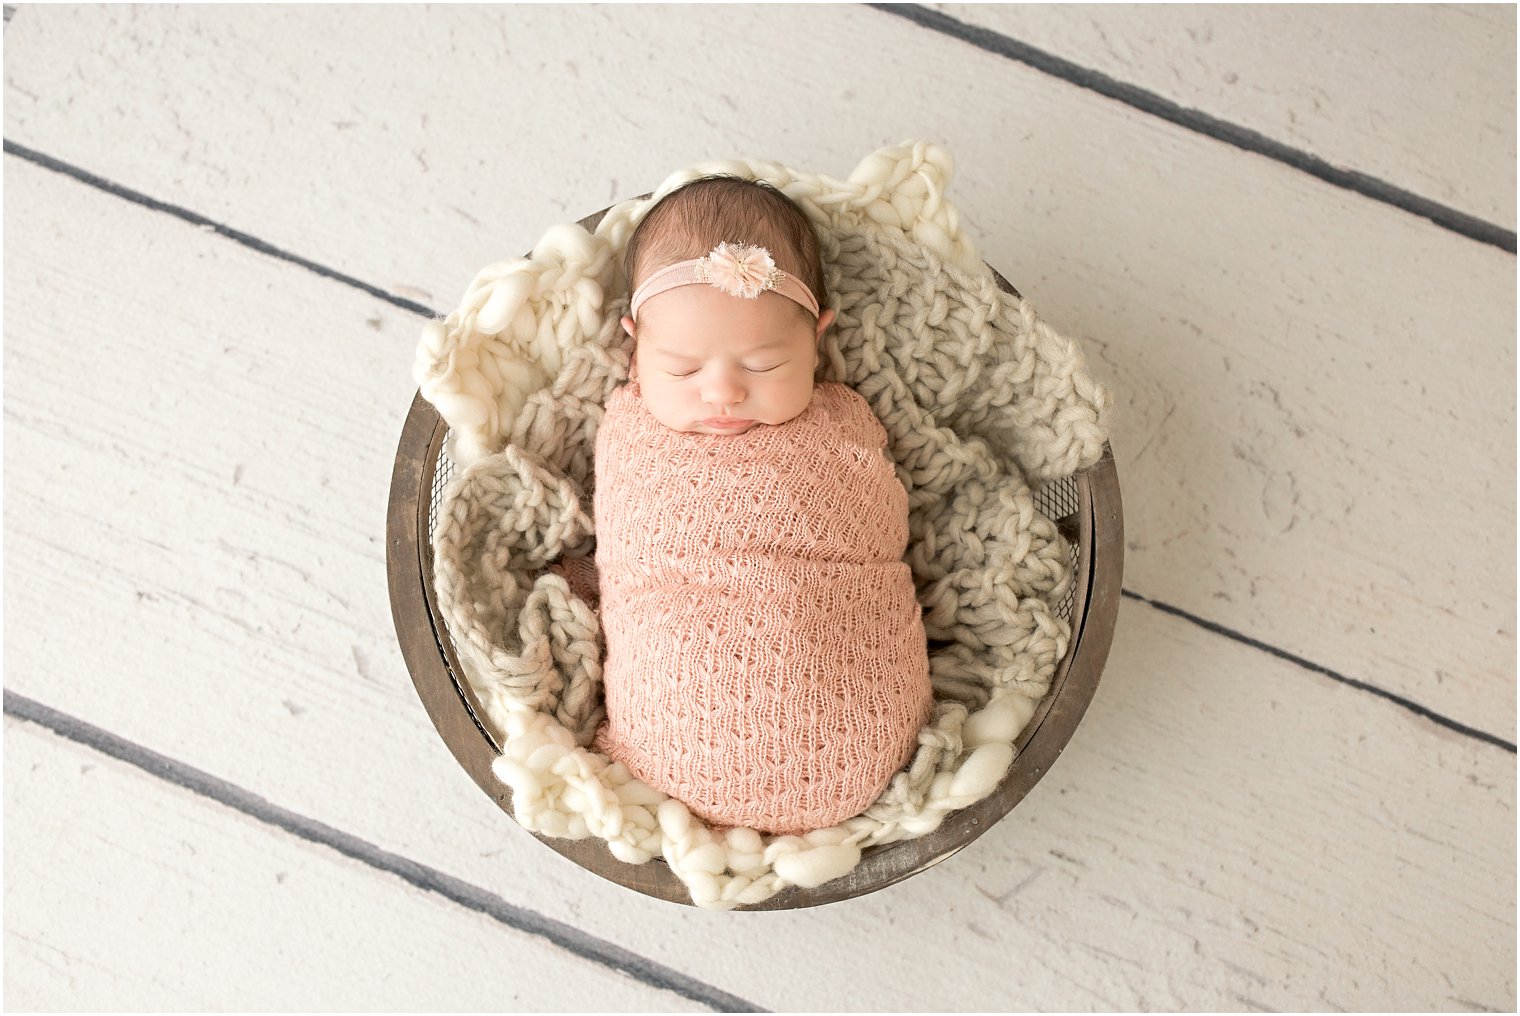 Baby swaddled and placed in a wooden bowl